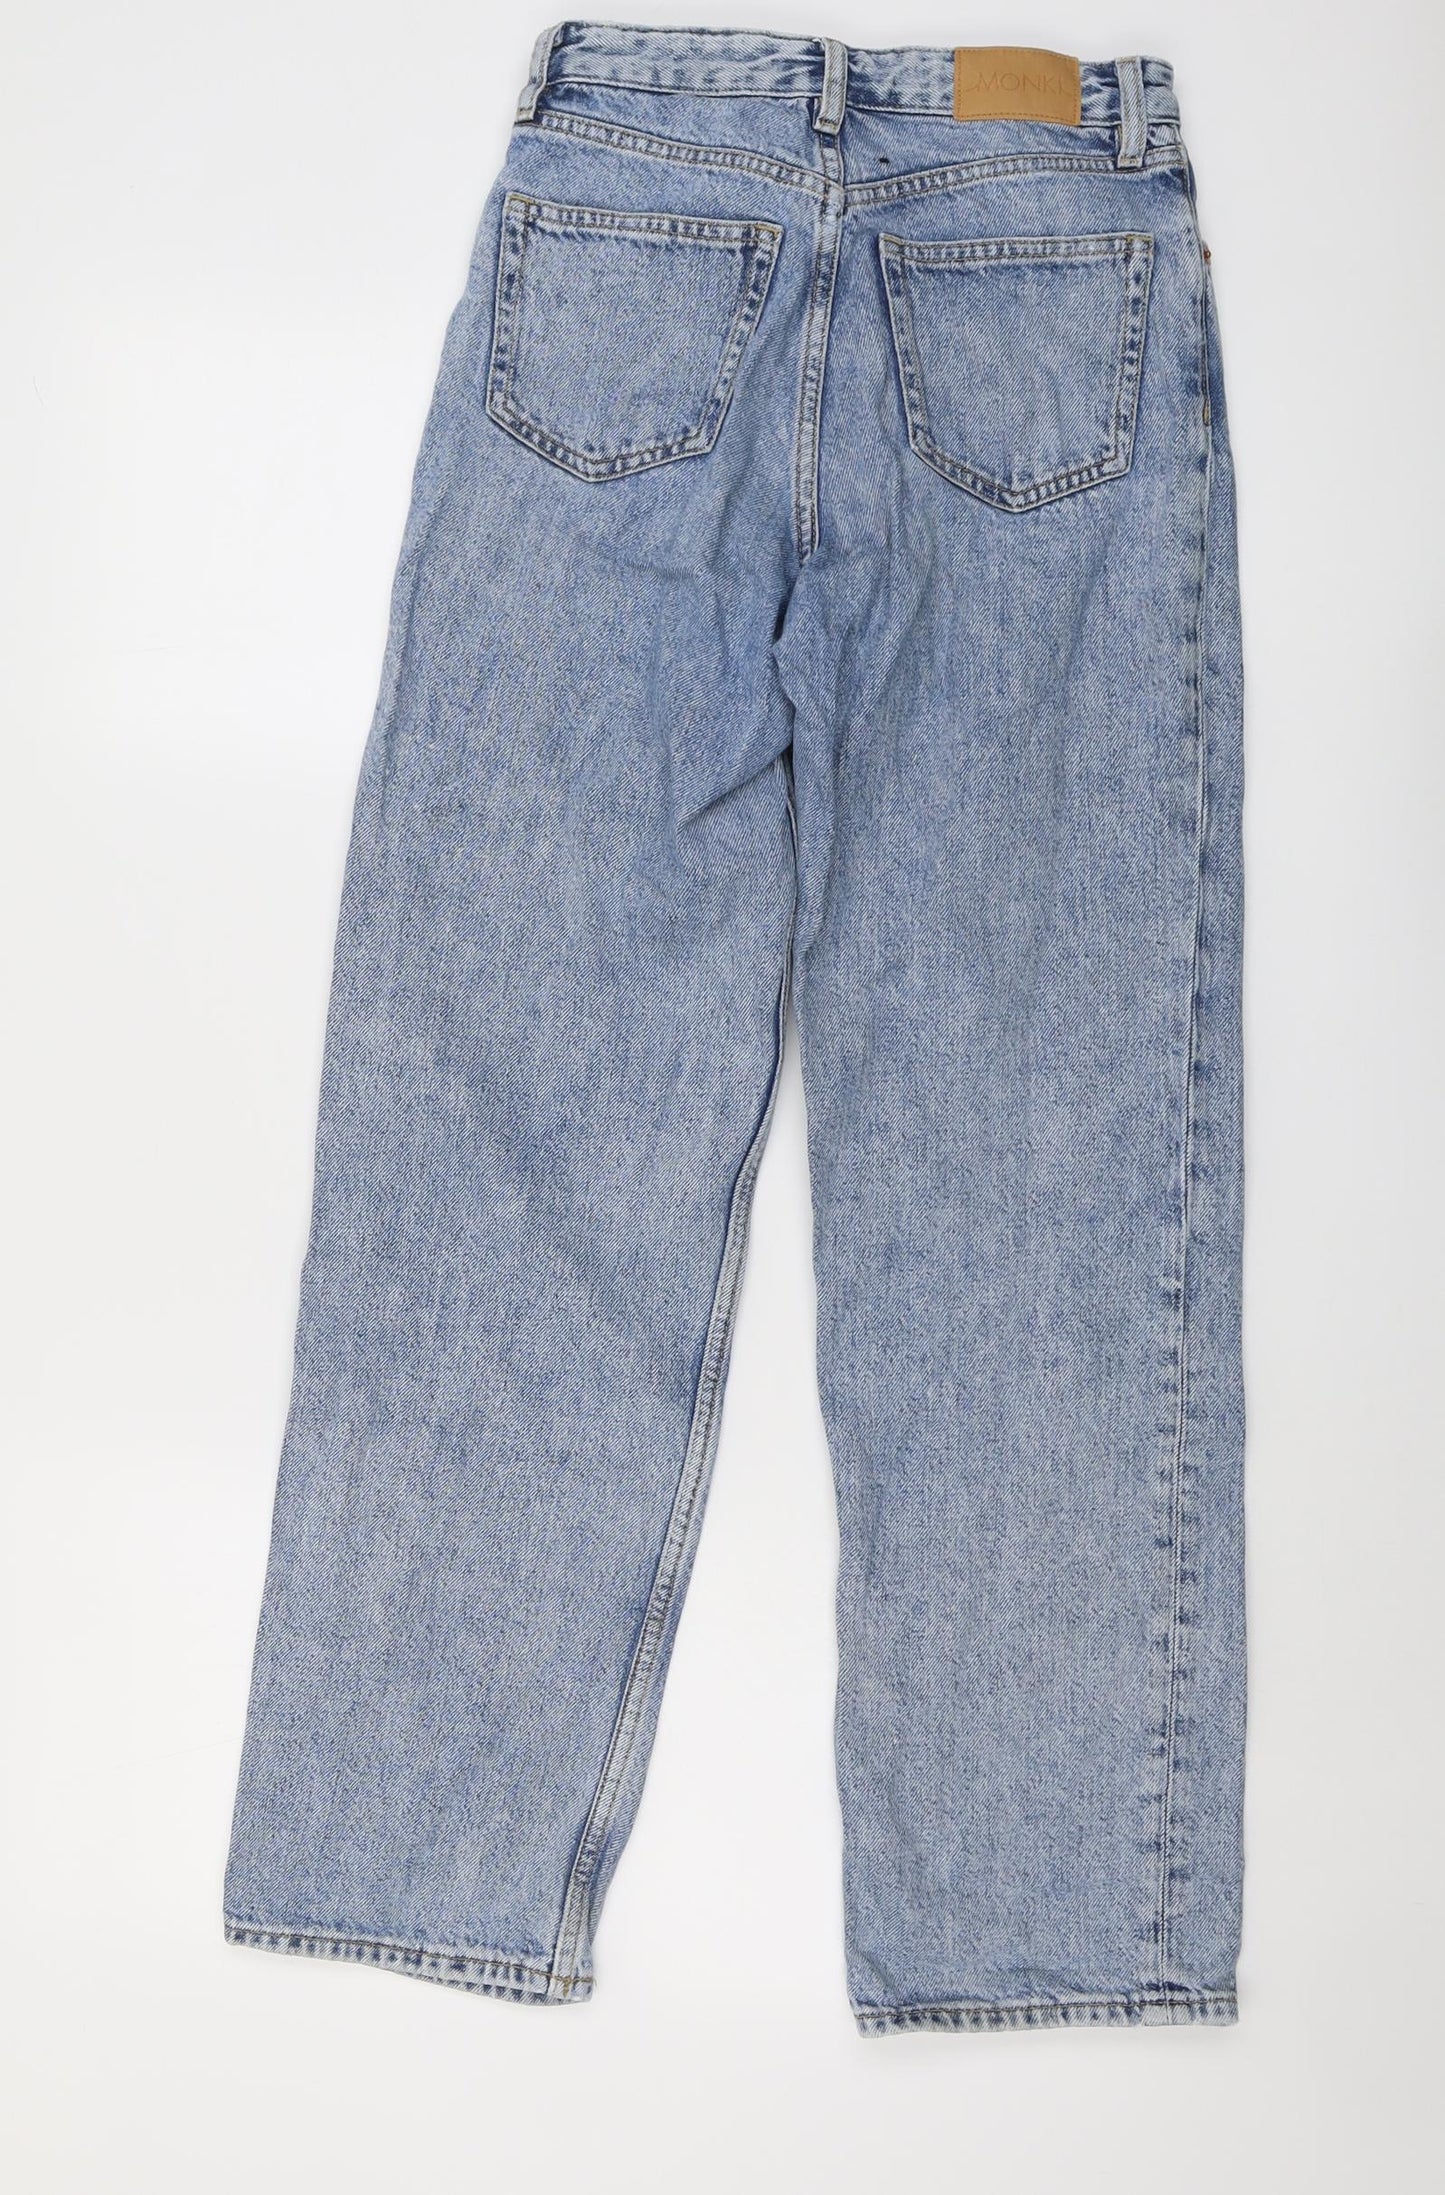 Monki Womens Blue Cotton Straight Jeans Size 25 in L29 in Regular Button